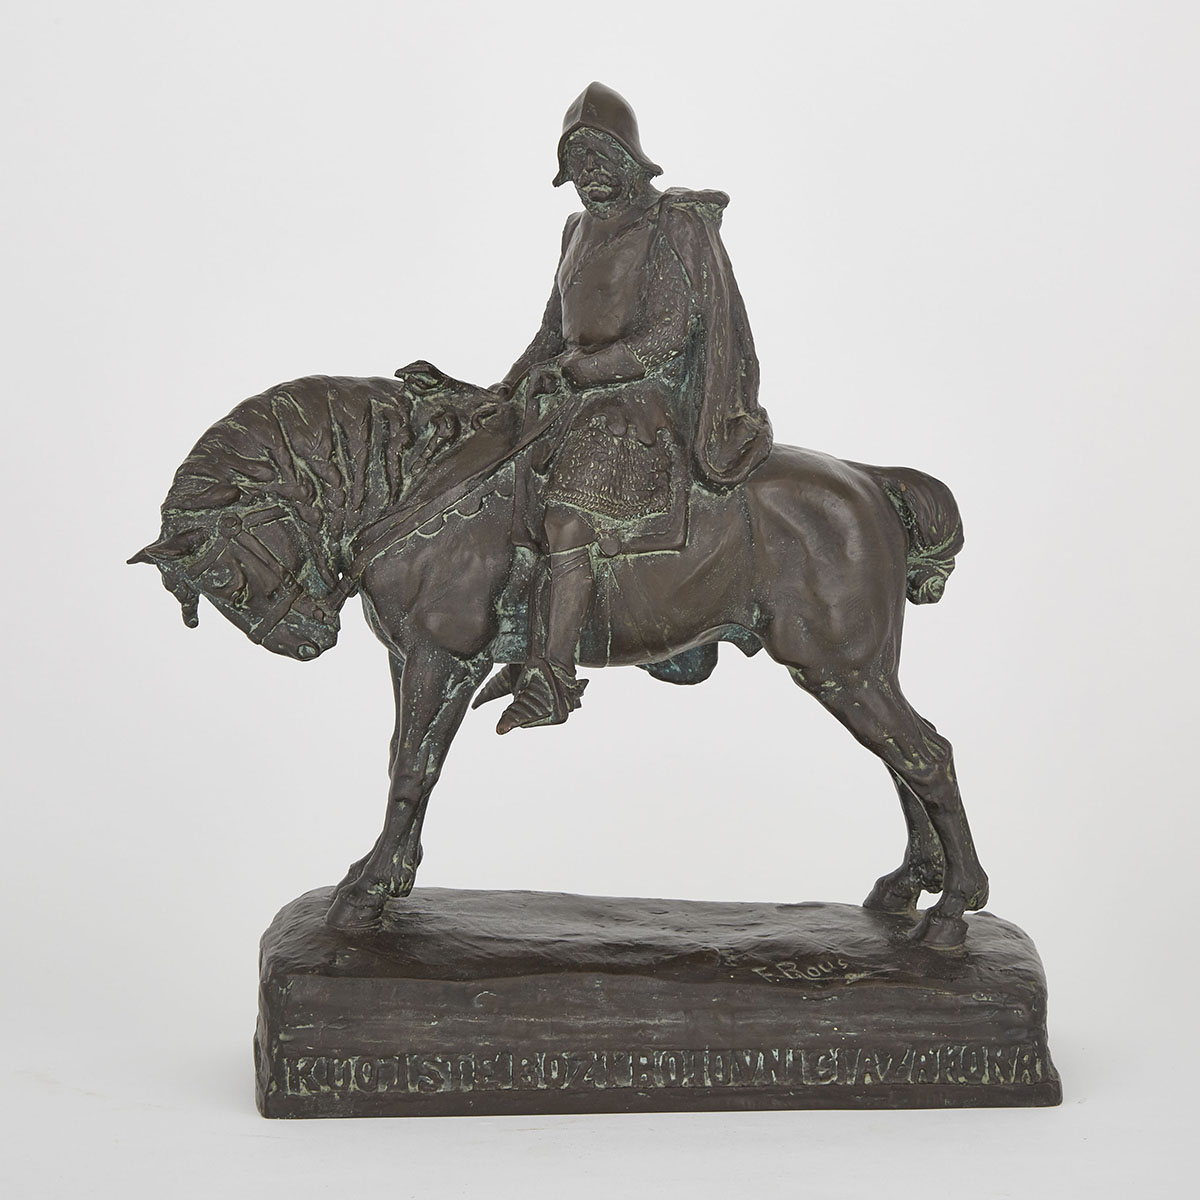 Large Patinated Bronze Equestrian Group of Jan Zizka of Trocnov, after the model by Frantisek Rous (Czeck, 1872-1936)
